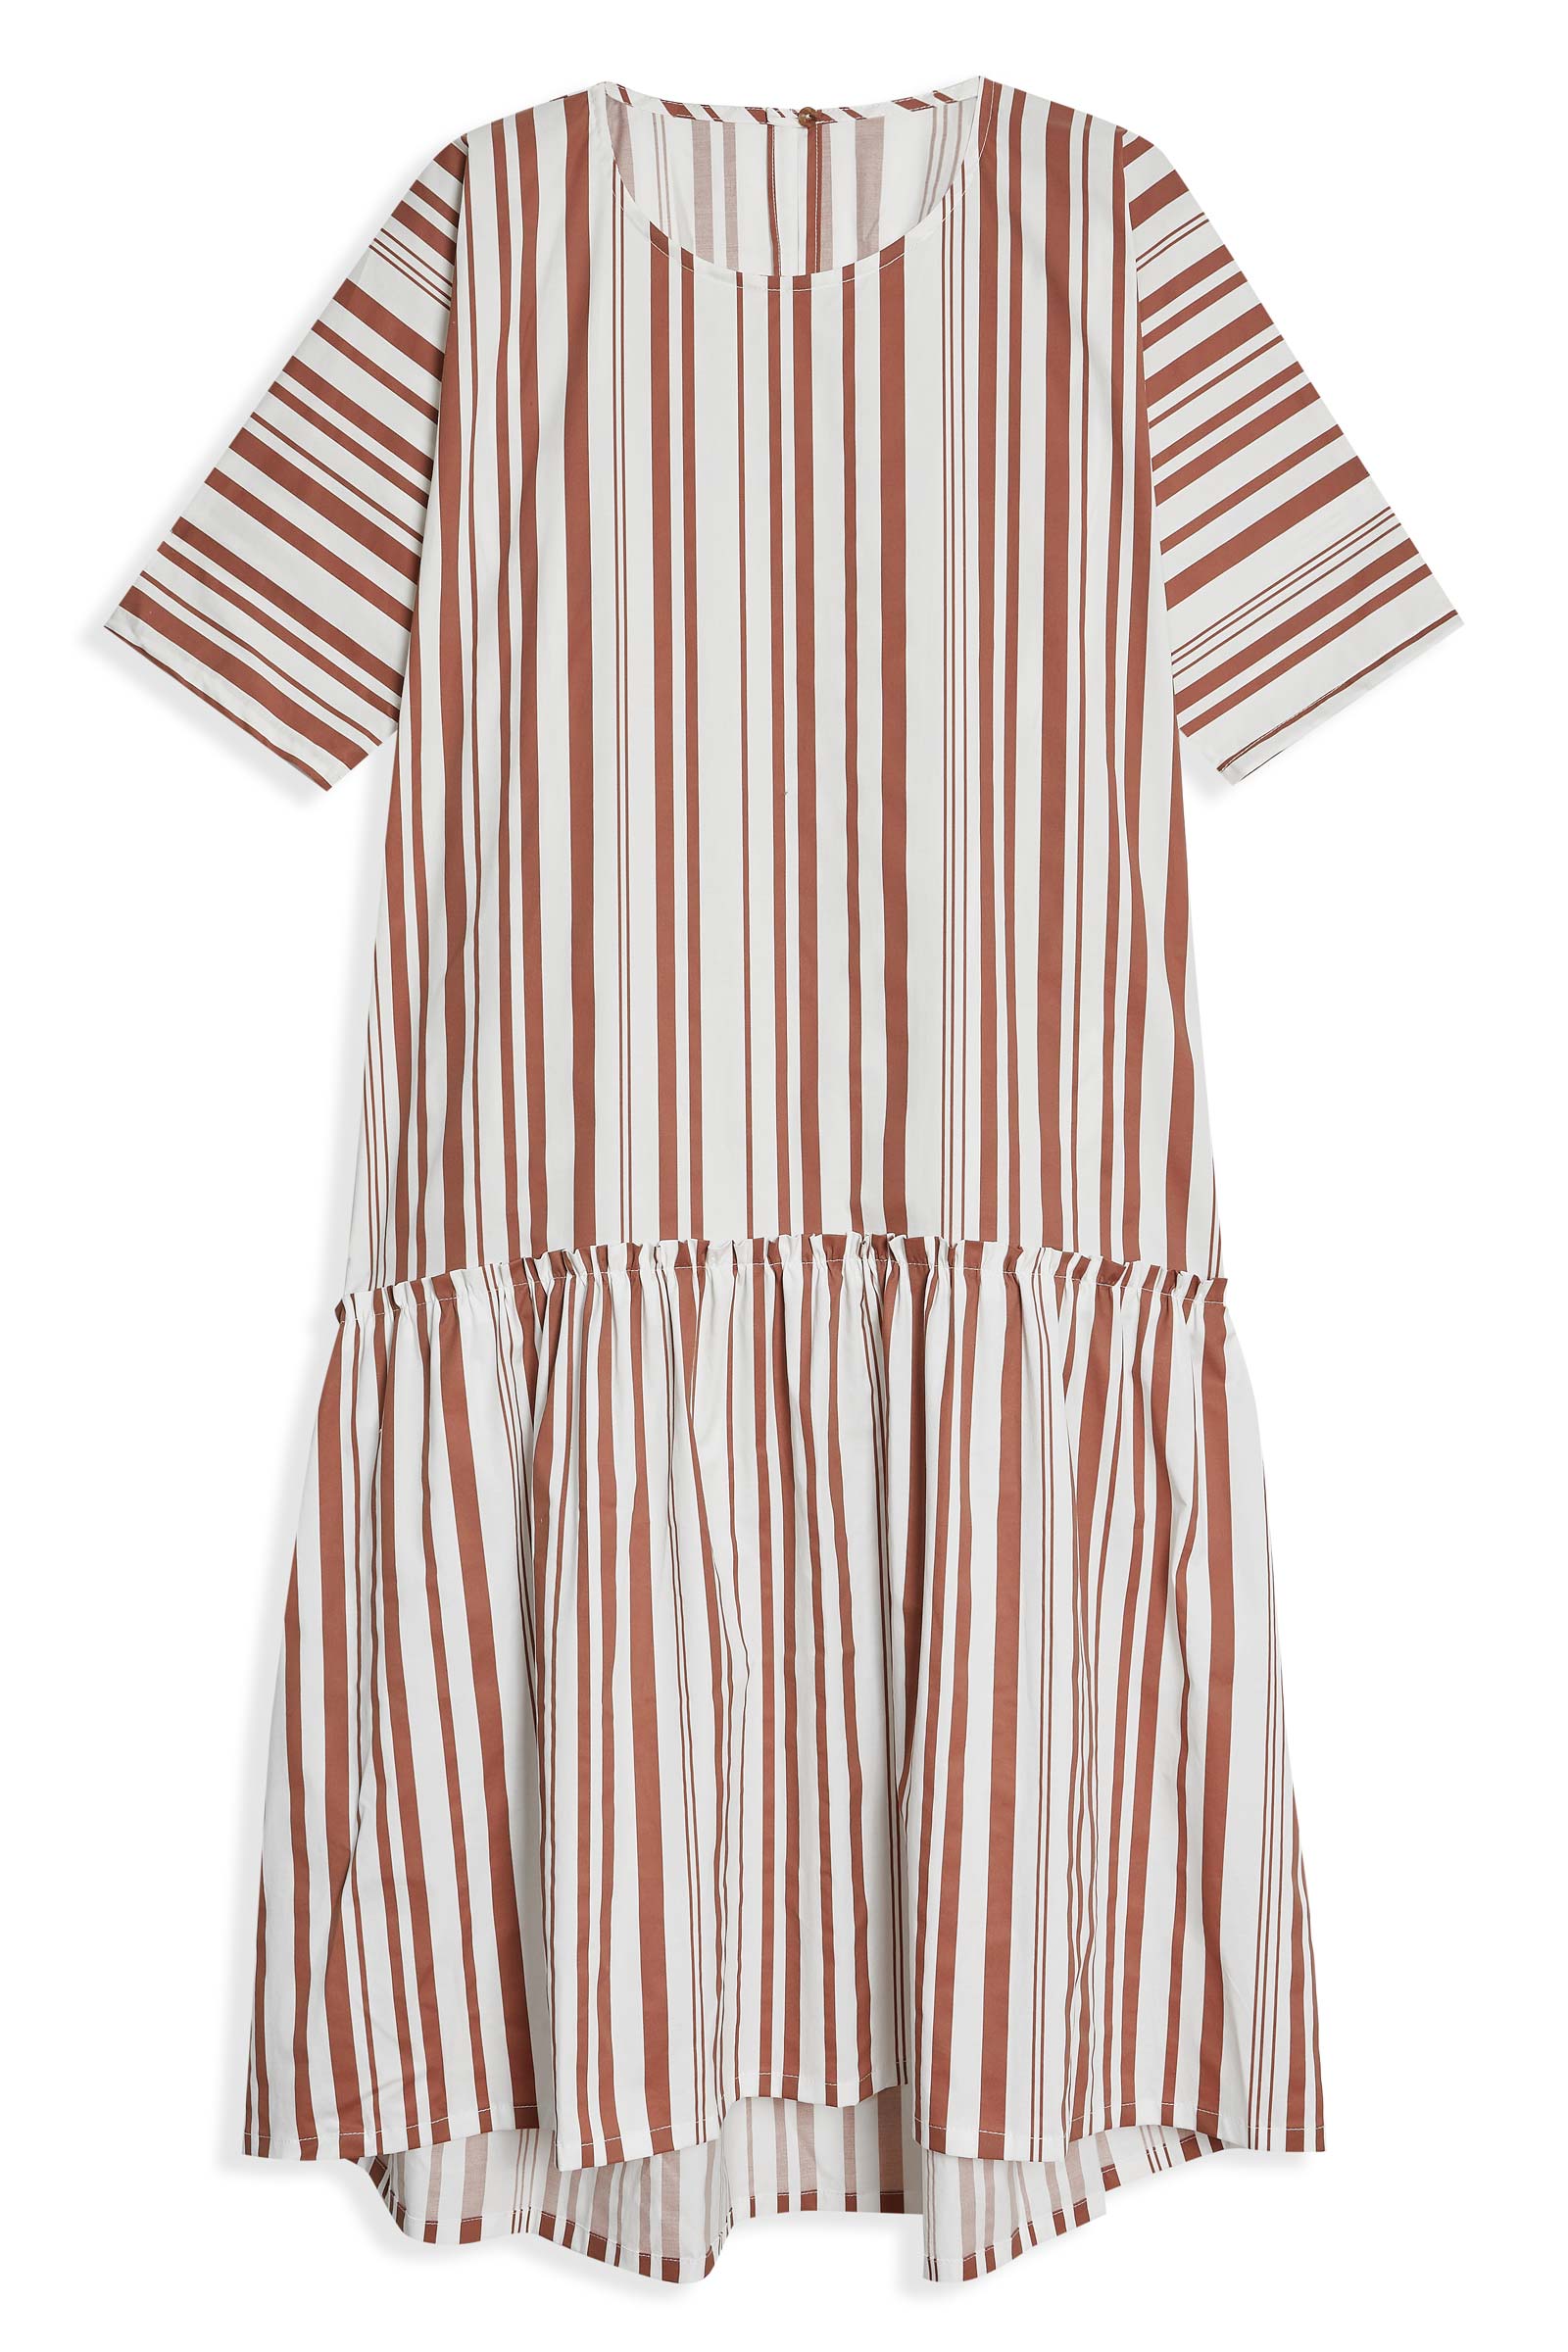 10 to 10 striped dress product image